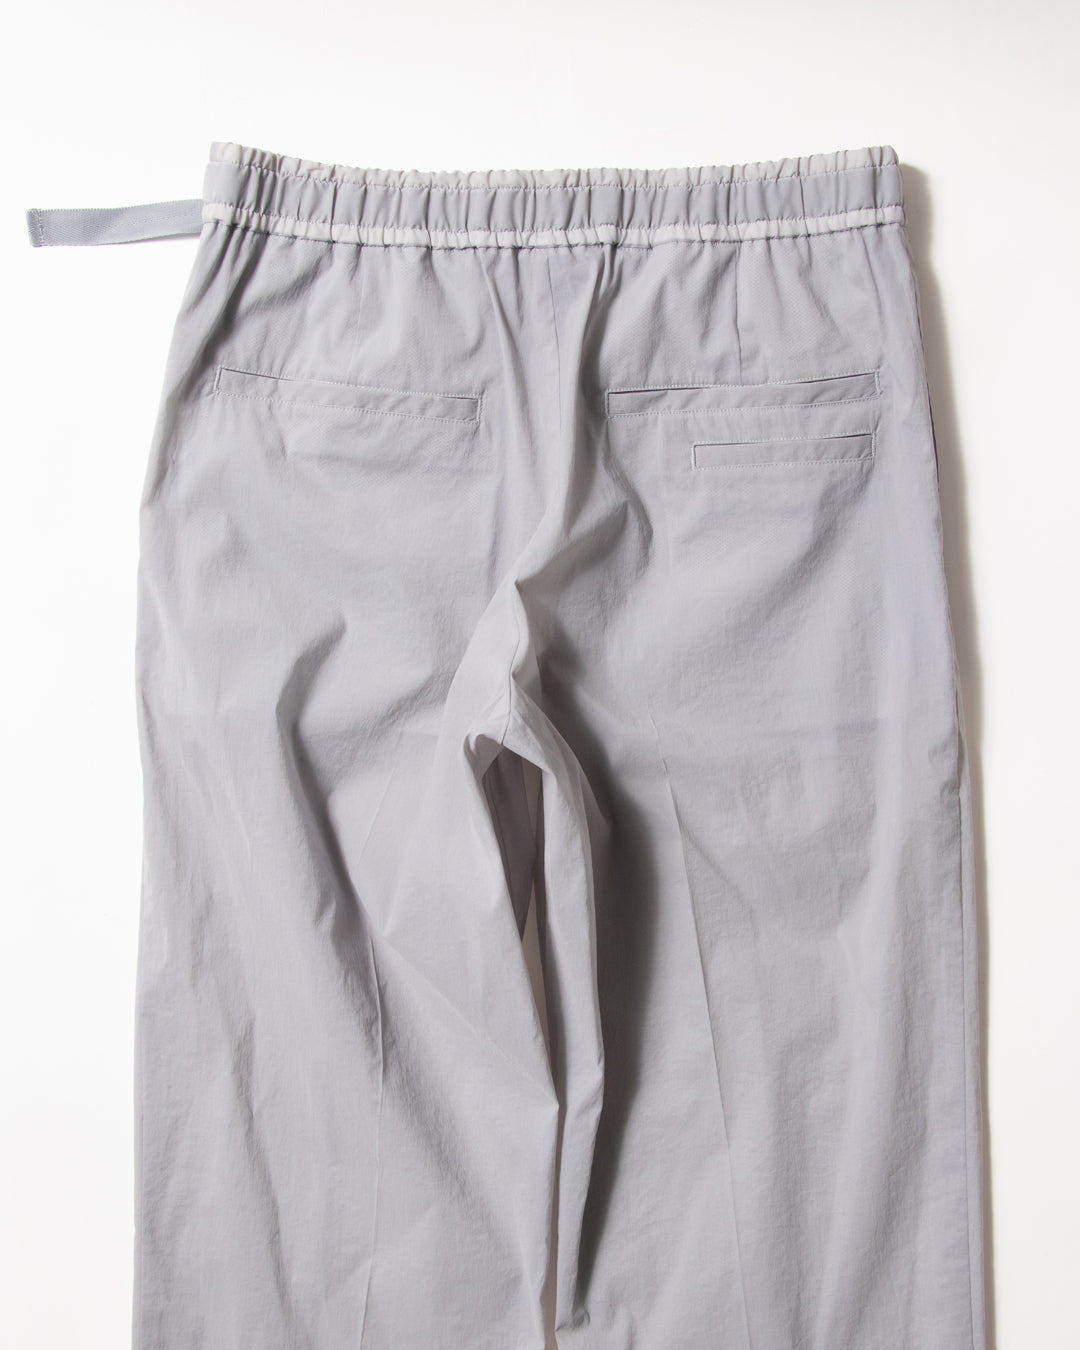 ALBER / JOG PANTS (GRY) - Baby's all right